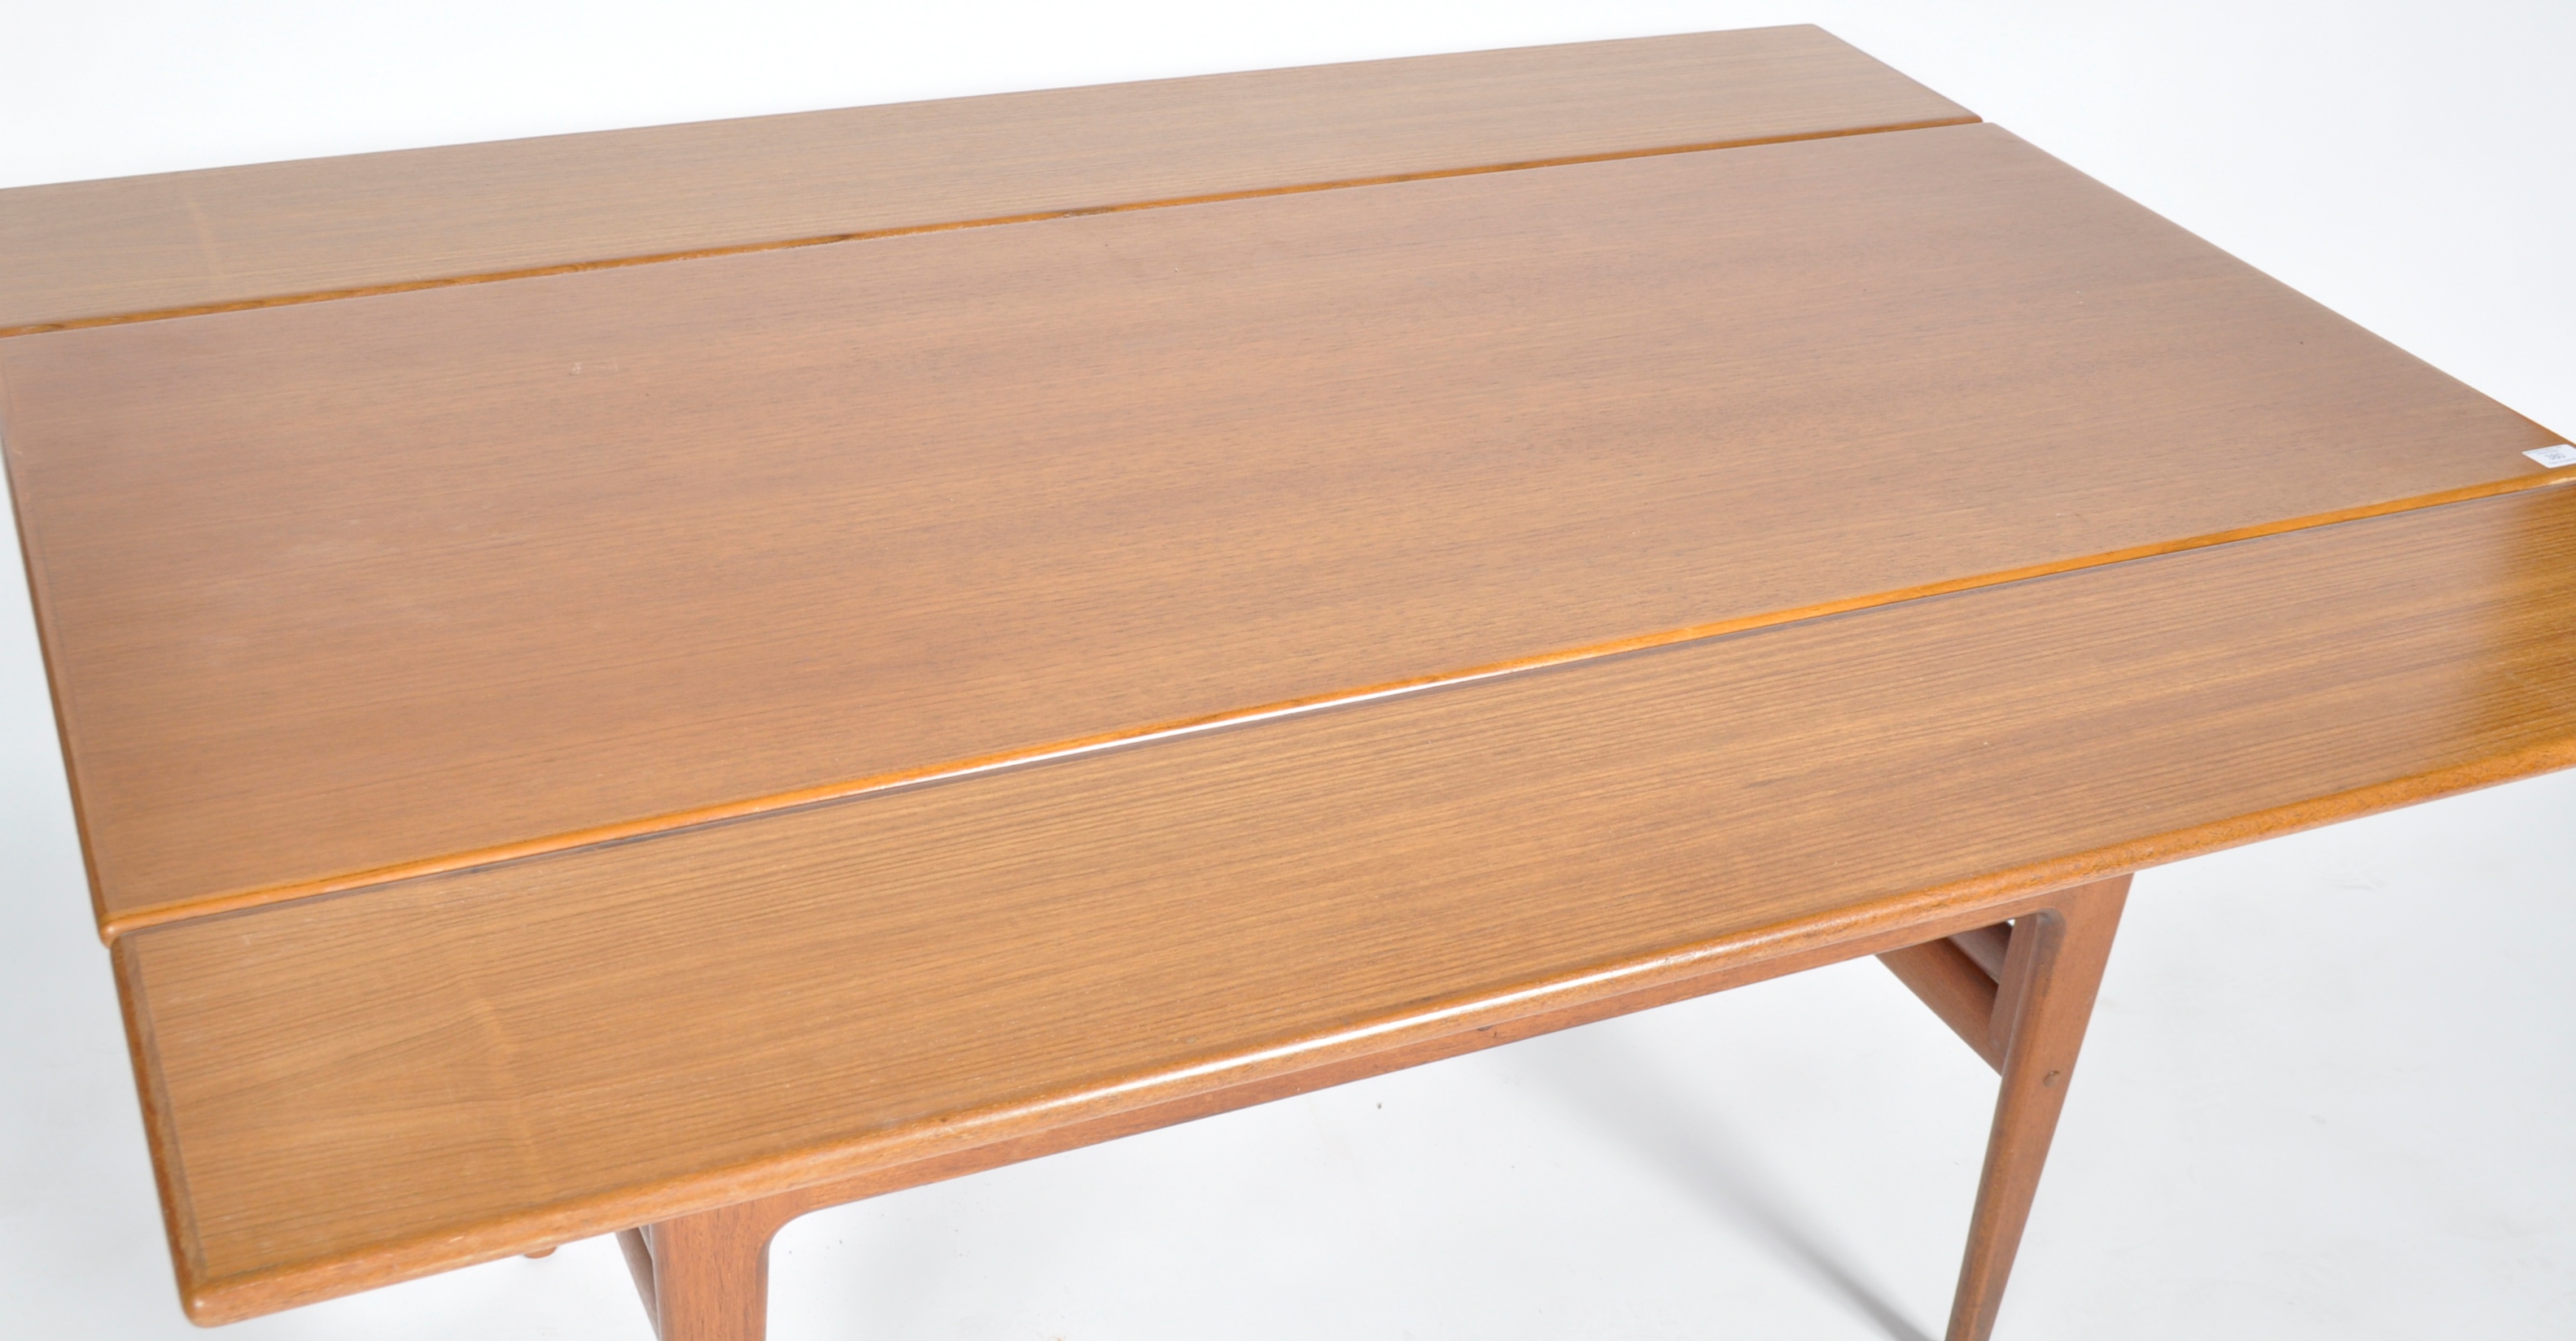 TRIOH MOBLER - DANISH METAMORPHIC LOW TABLE / DINING TABLE - Image 4 of 4